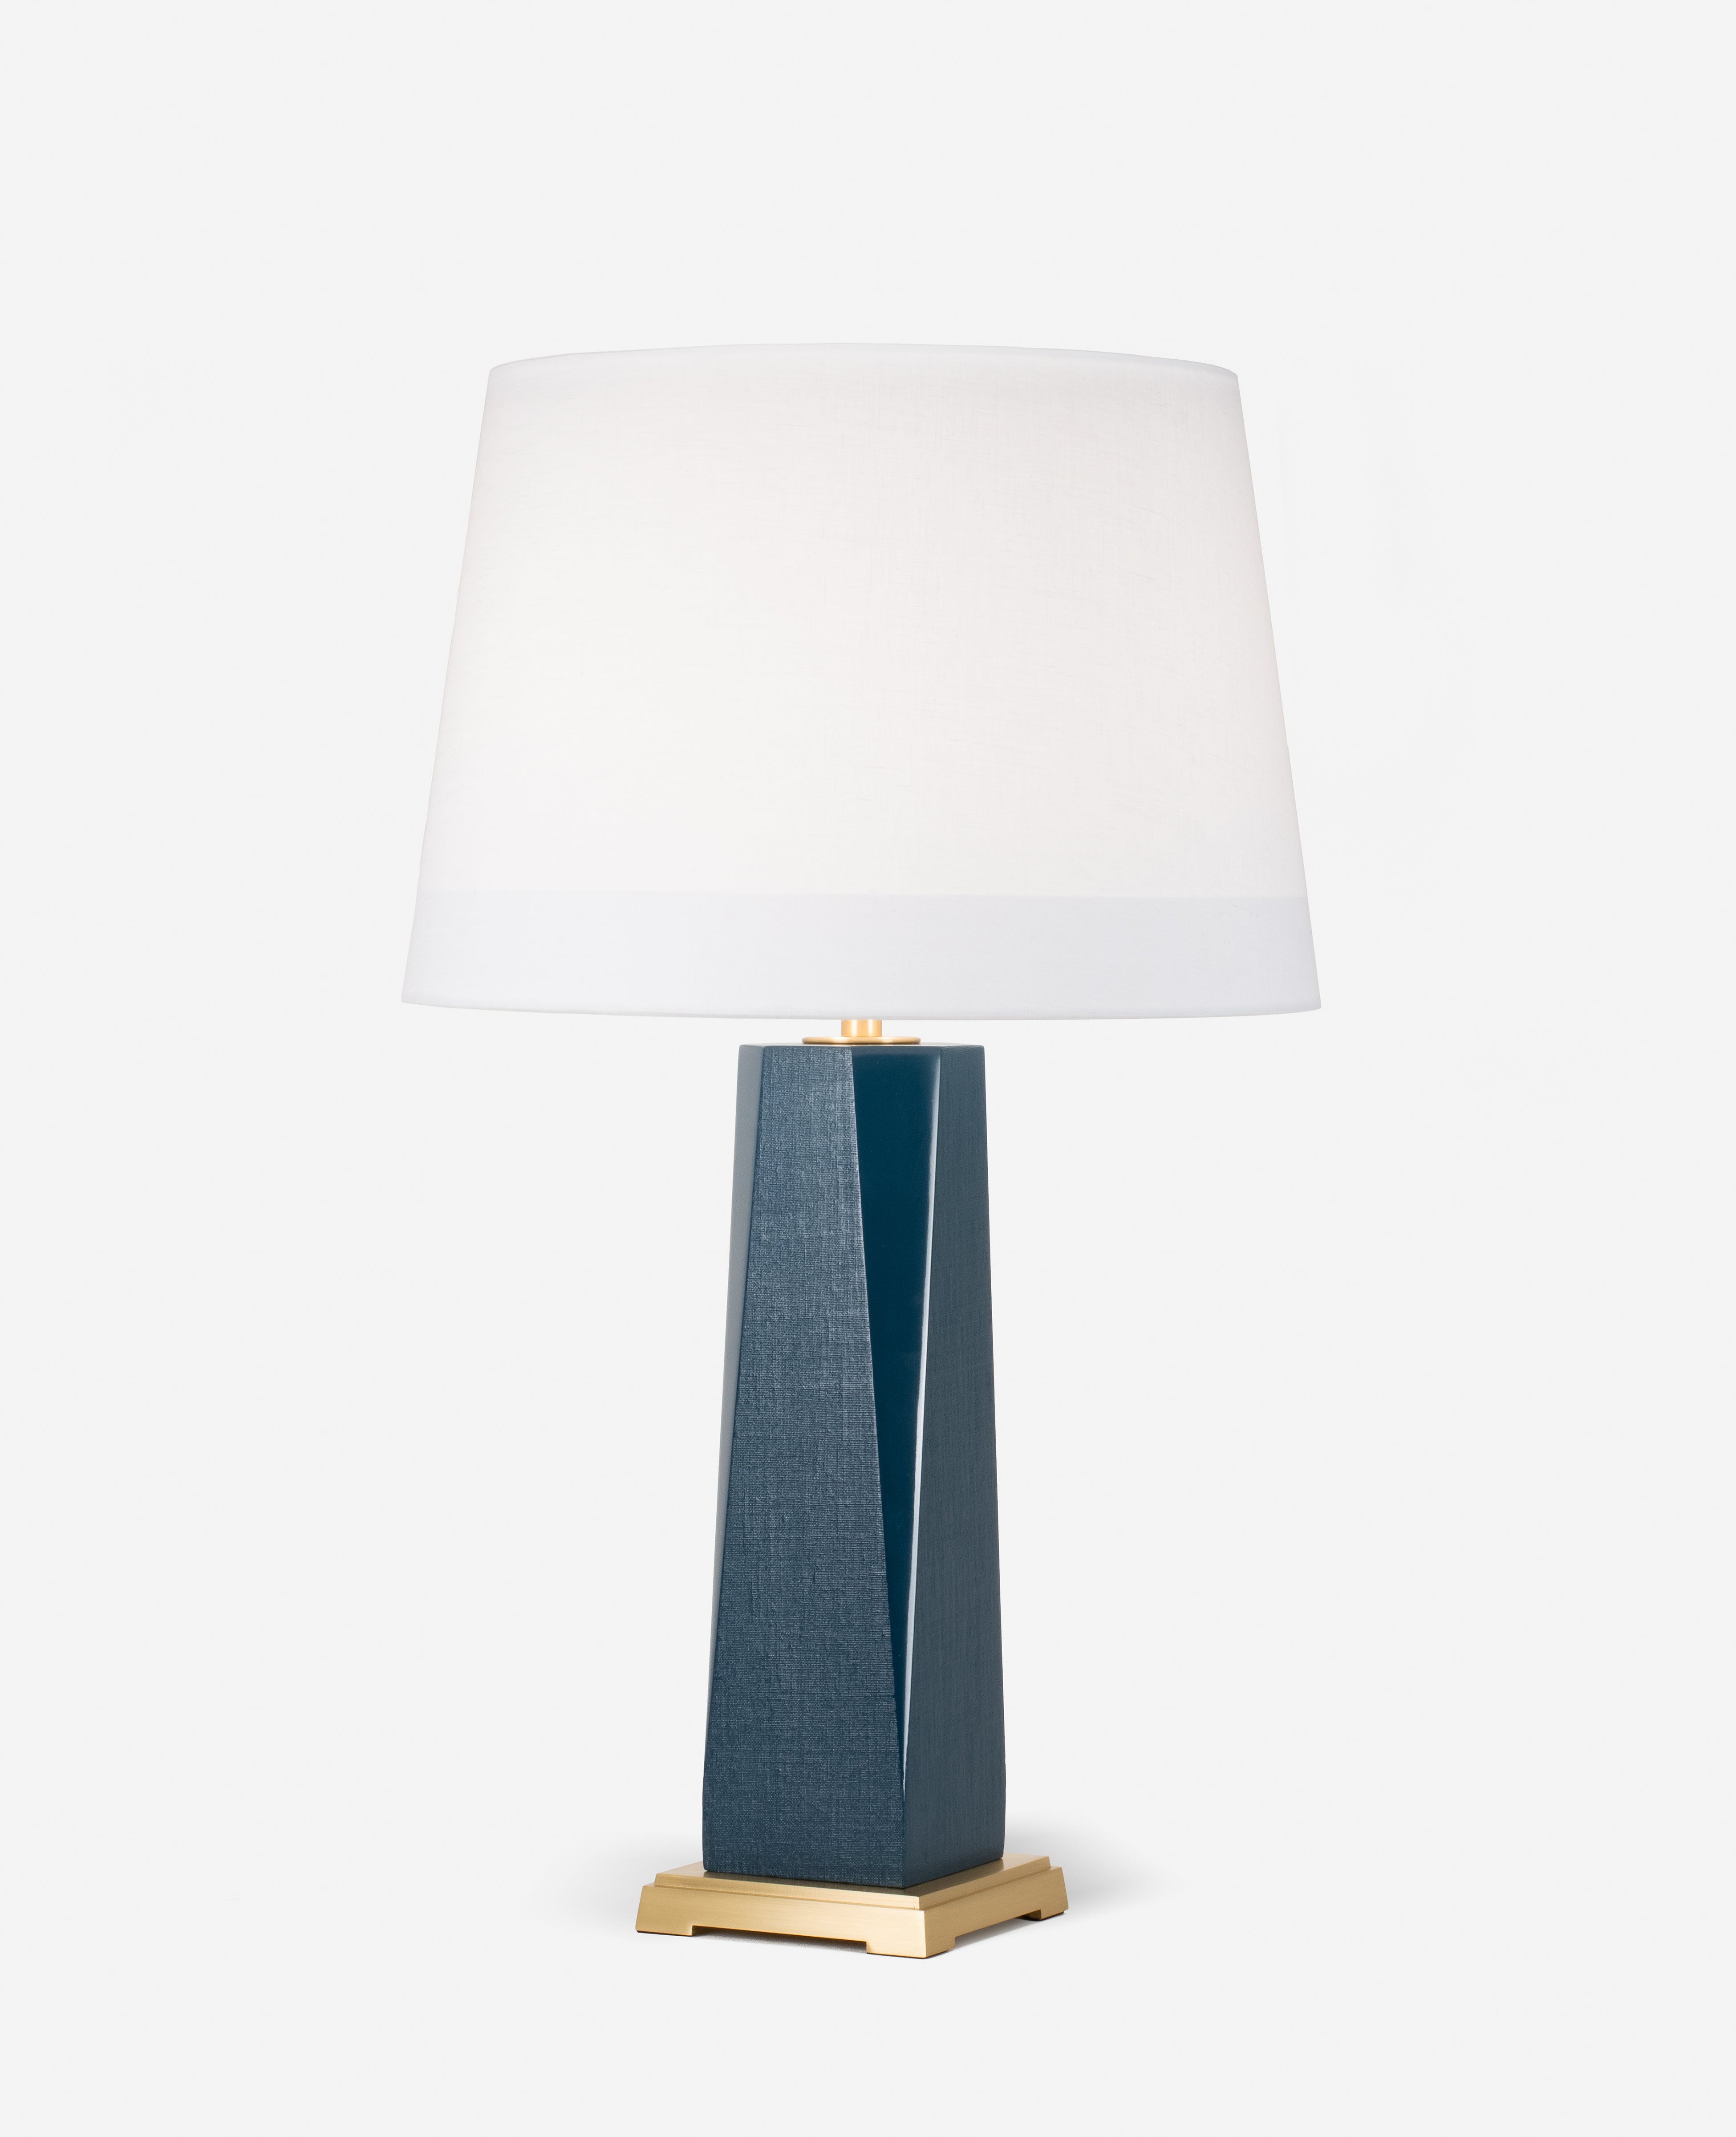 Draper Table Lamp w Brushed Brass with custom gloss finish